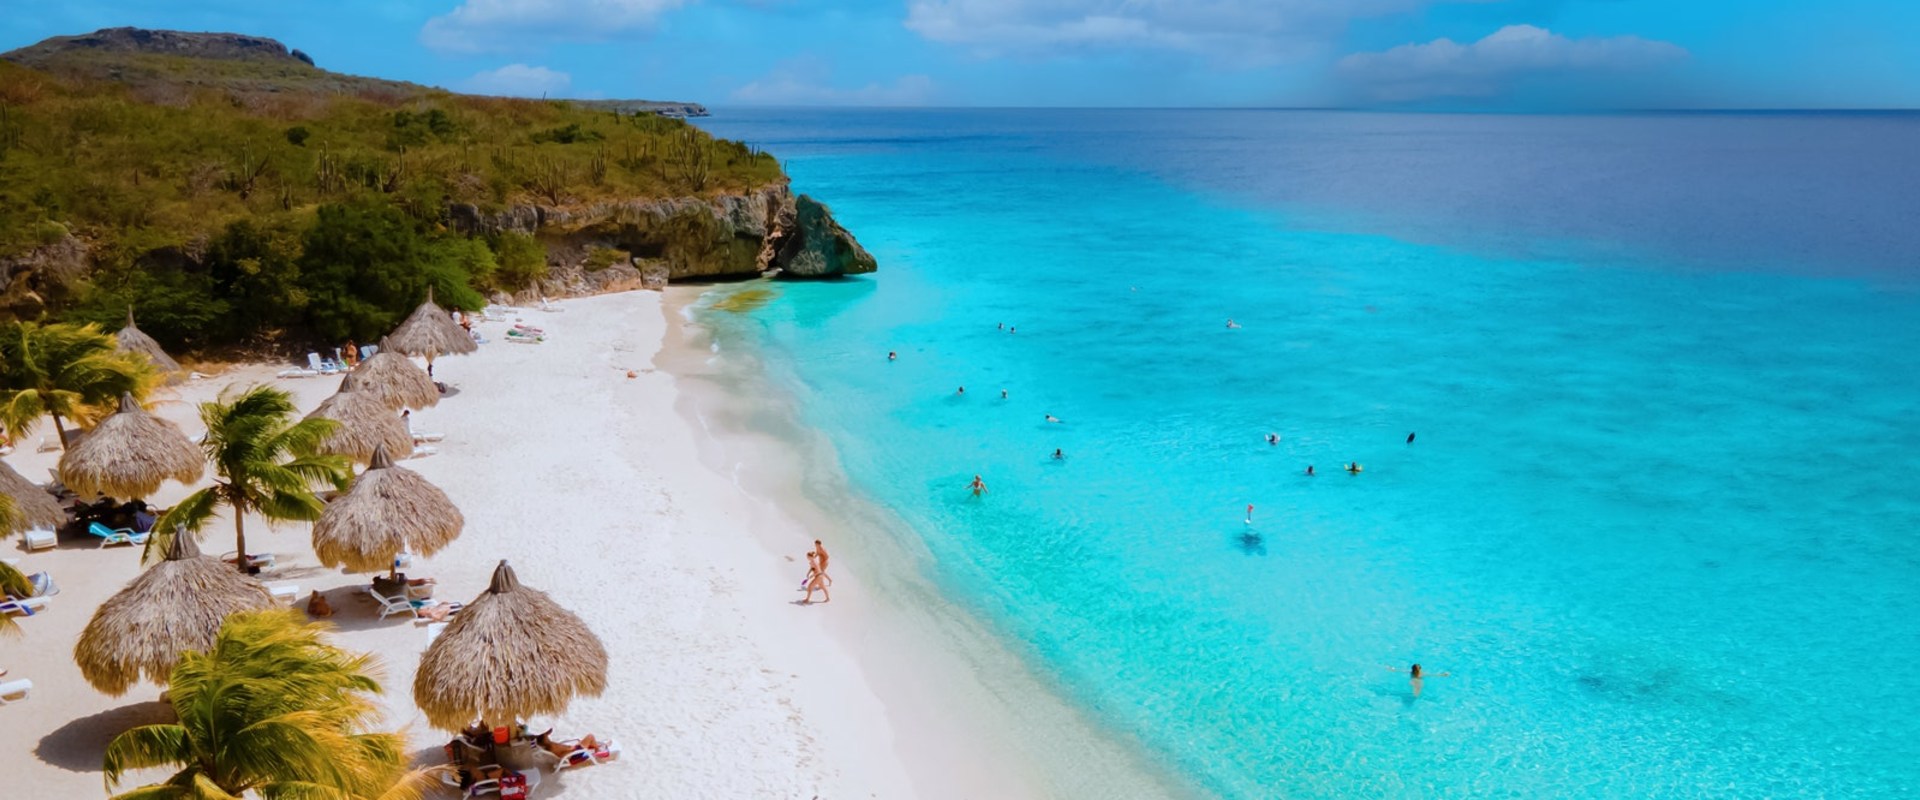 Best Beach Vacations Abroad: Top Destinations, Affordable Options, and More